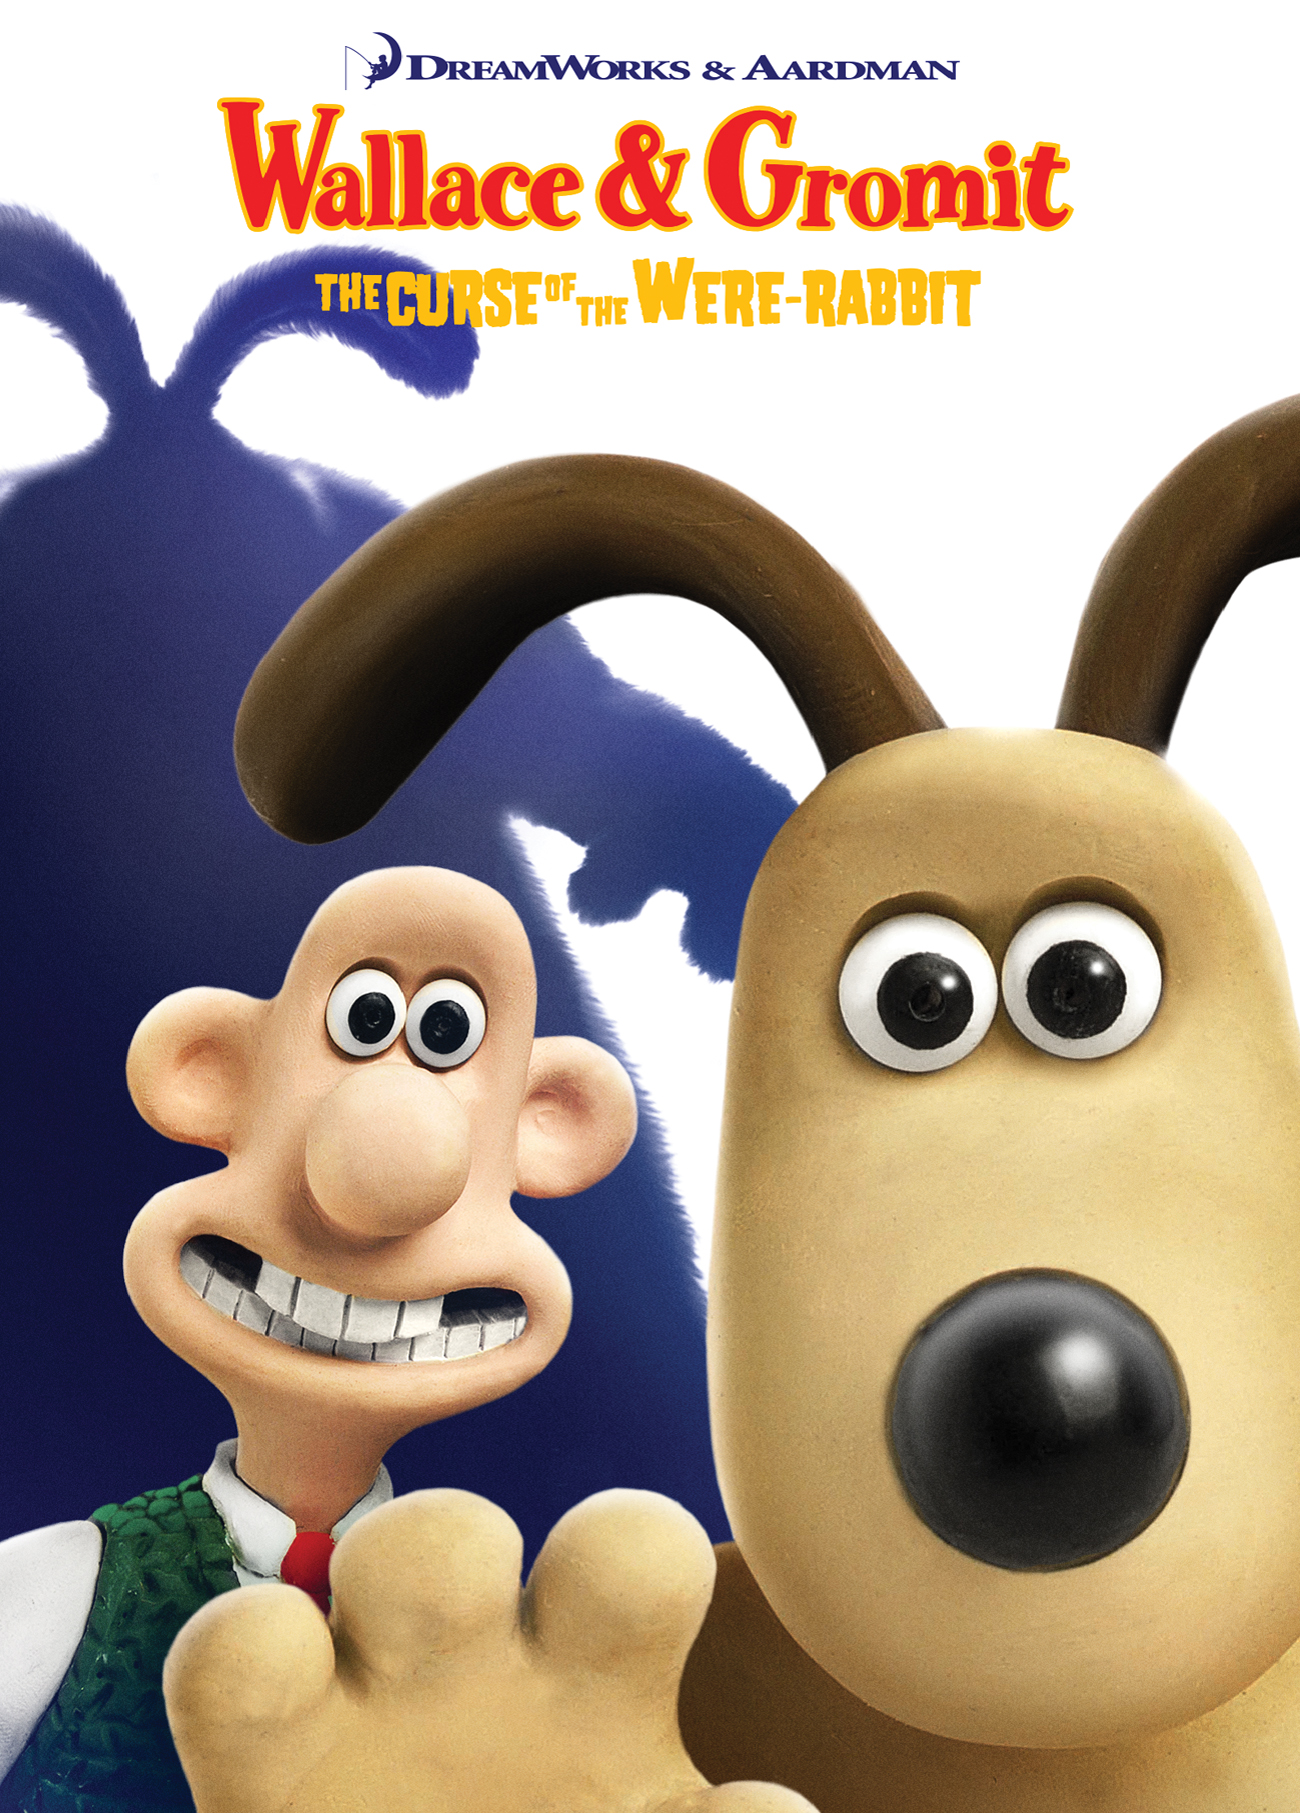 Wallace & Gromit: The Curse of The Were-rabbit (2005)